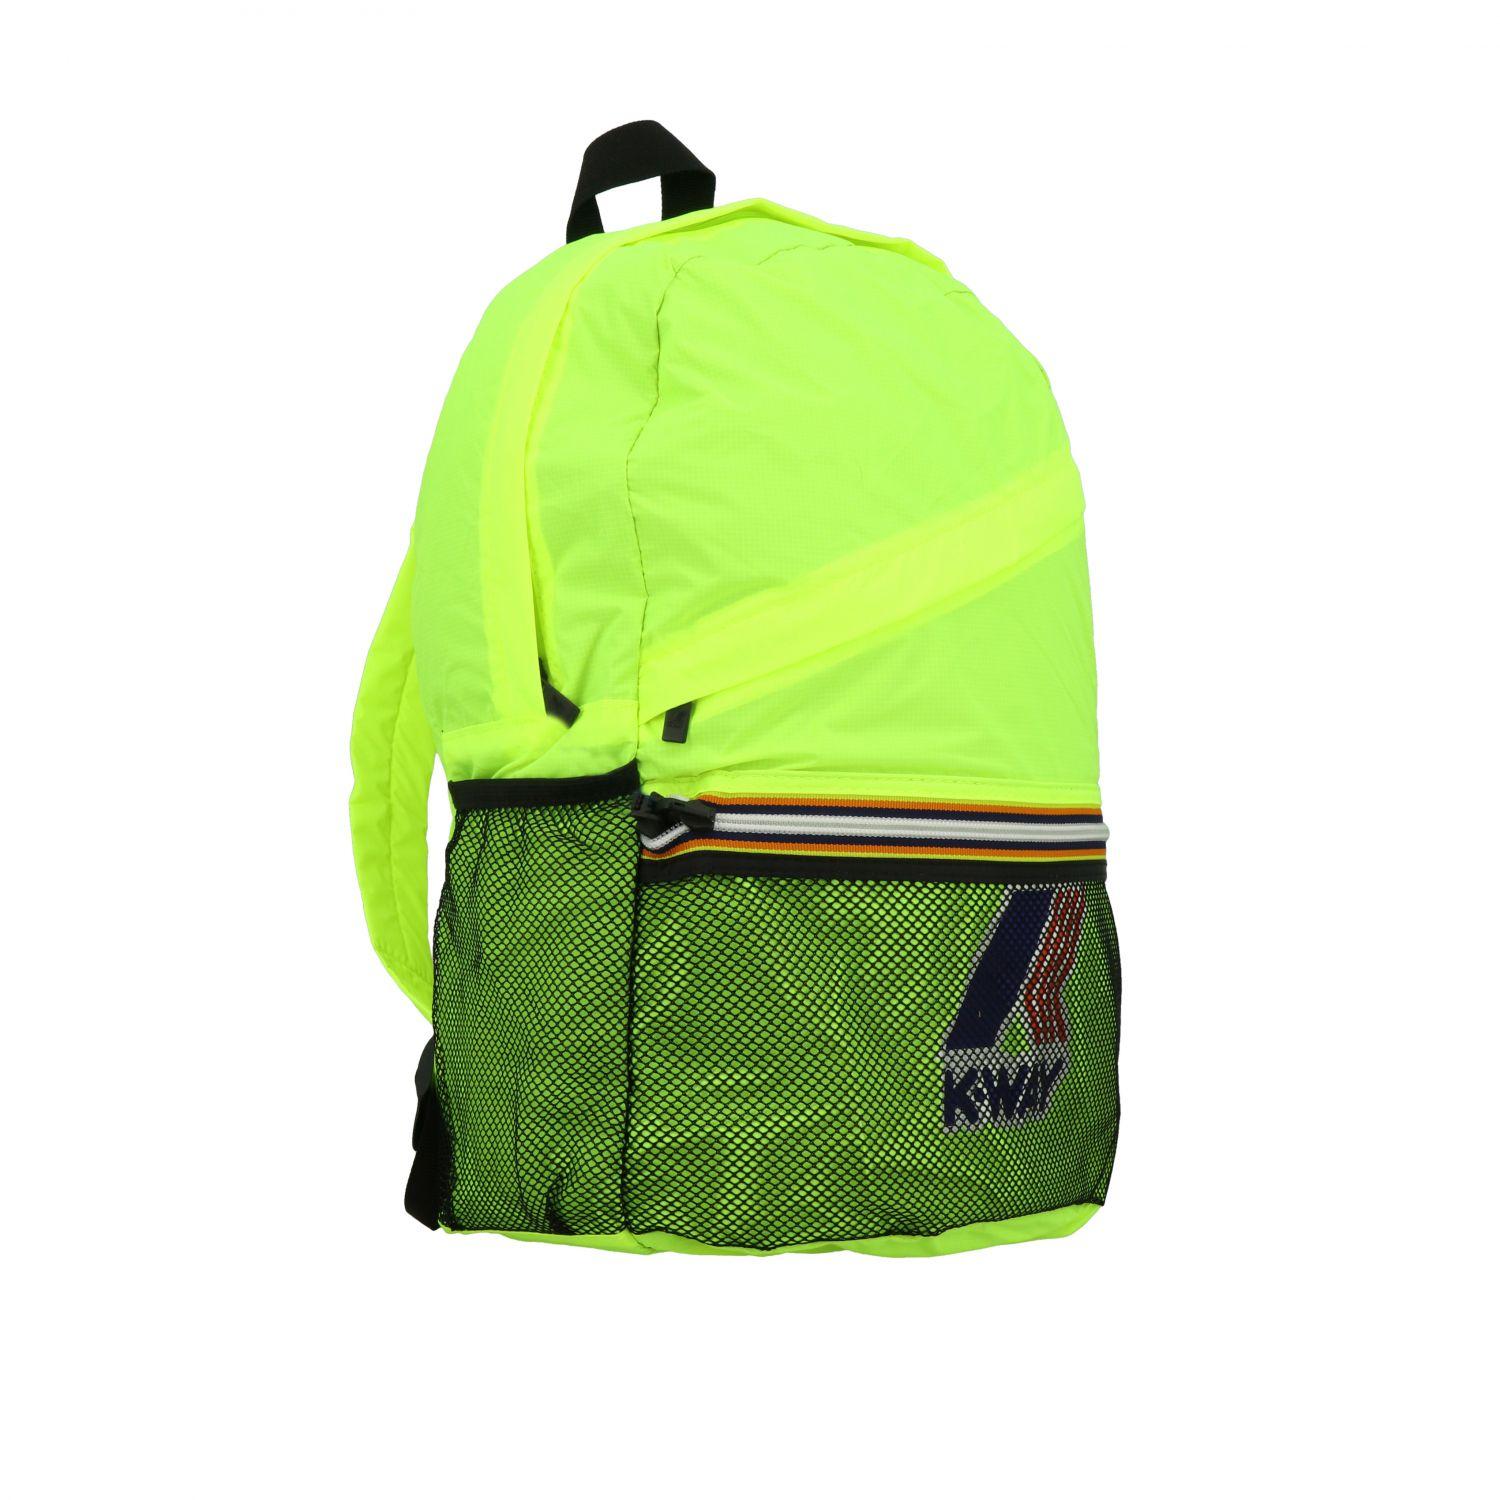 K-Way Backpack in Yellow for Men - Lyst